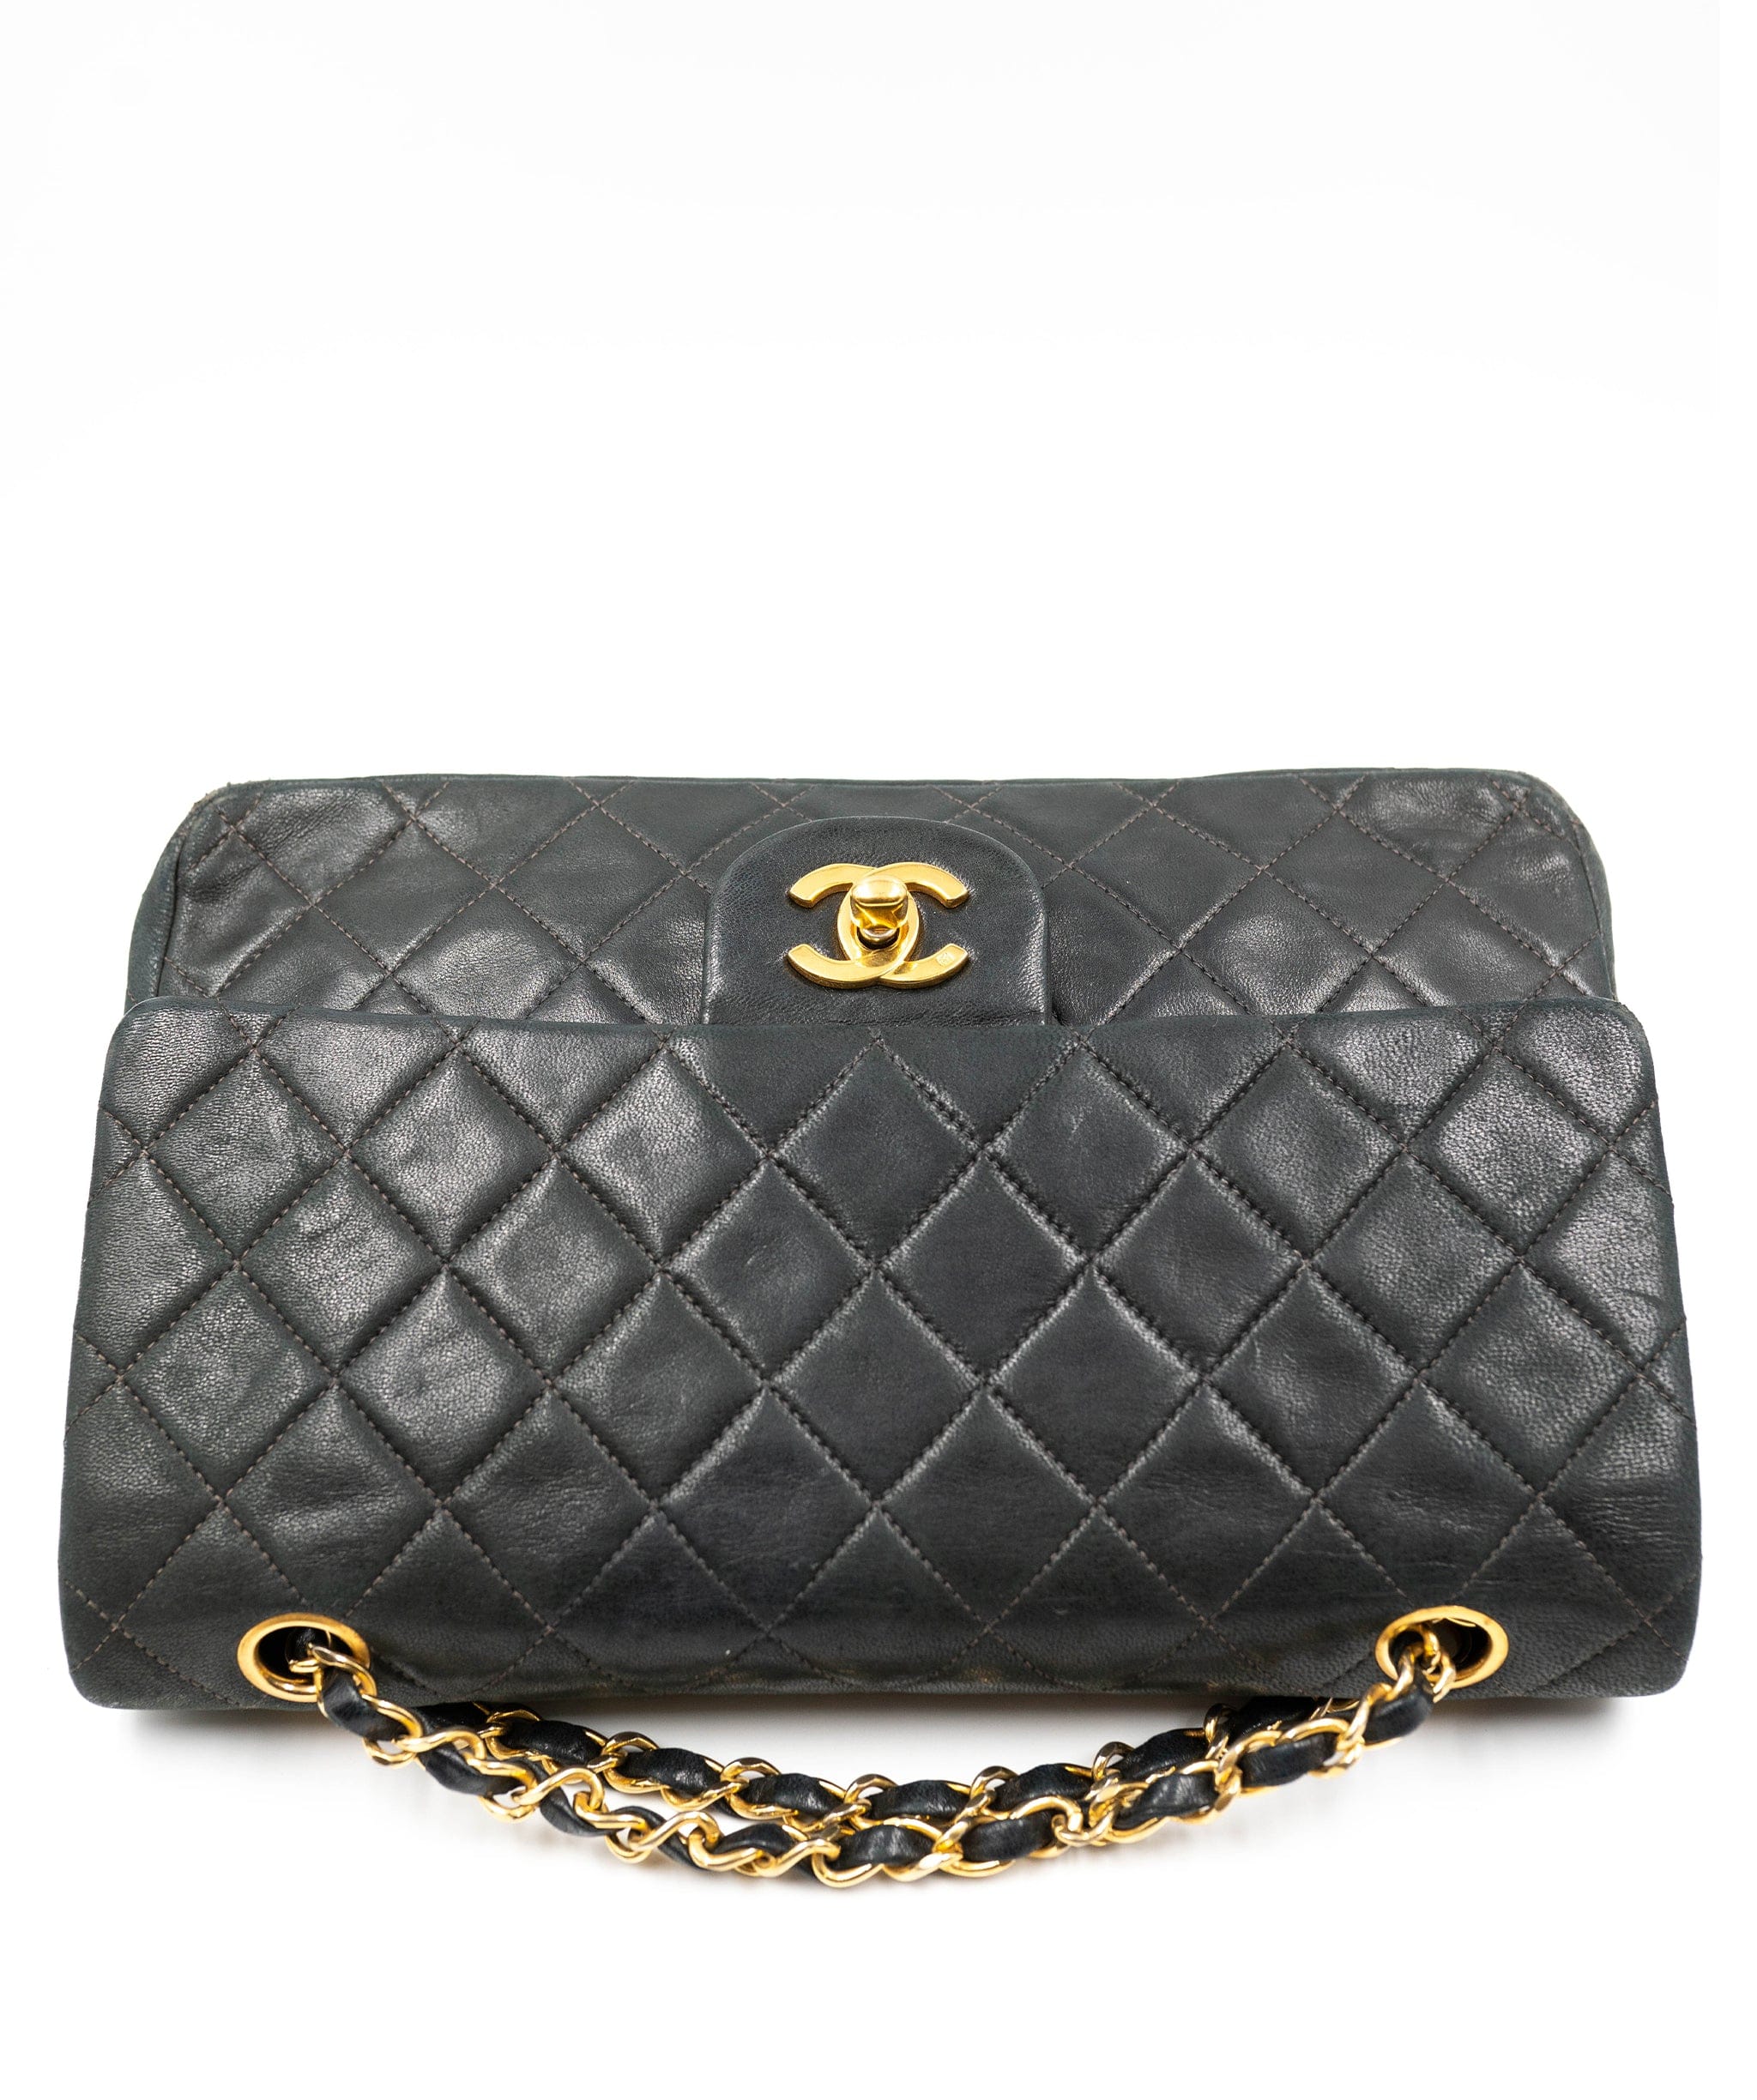 Chanel Chanel Medium Classic Double Flap Bag **wrong image attached please retake photos**